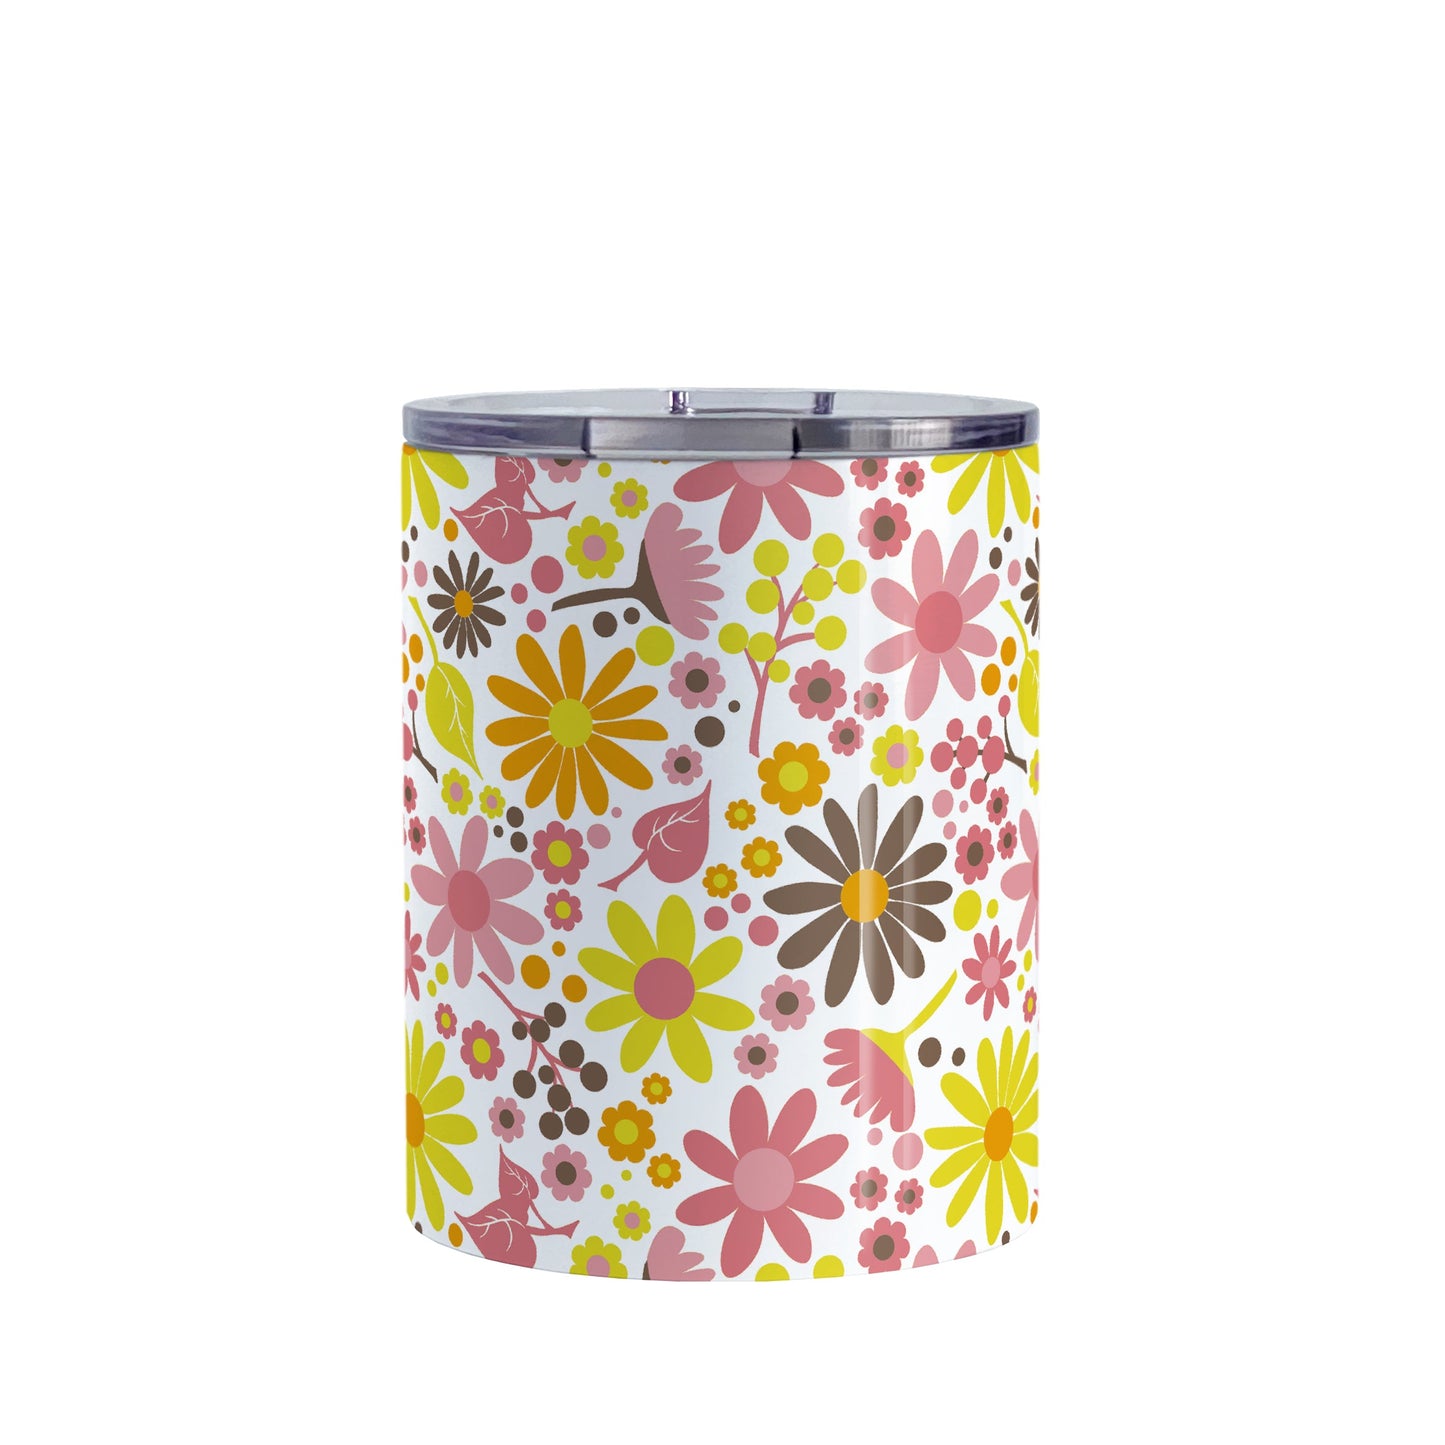 Fruity Summer Flowers Tumbler Cup (10oz, stainless steel insulated) at Amy's Coffee Mugs